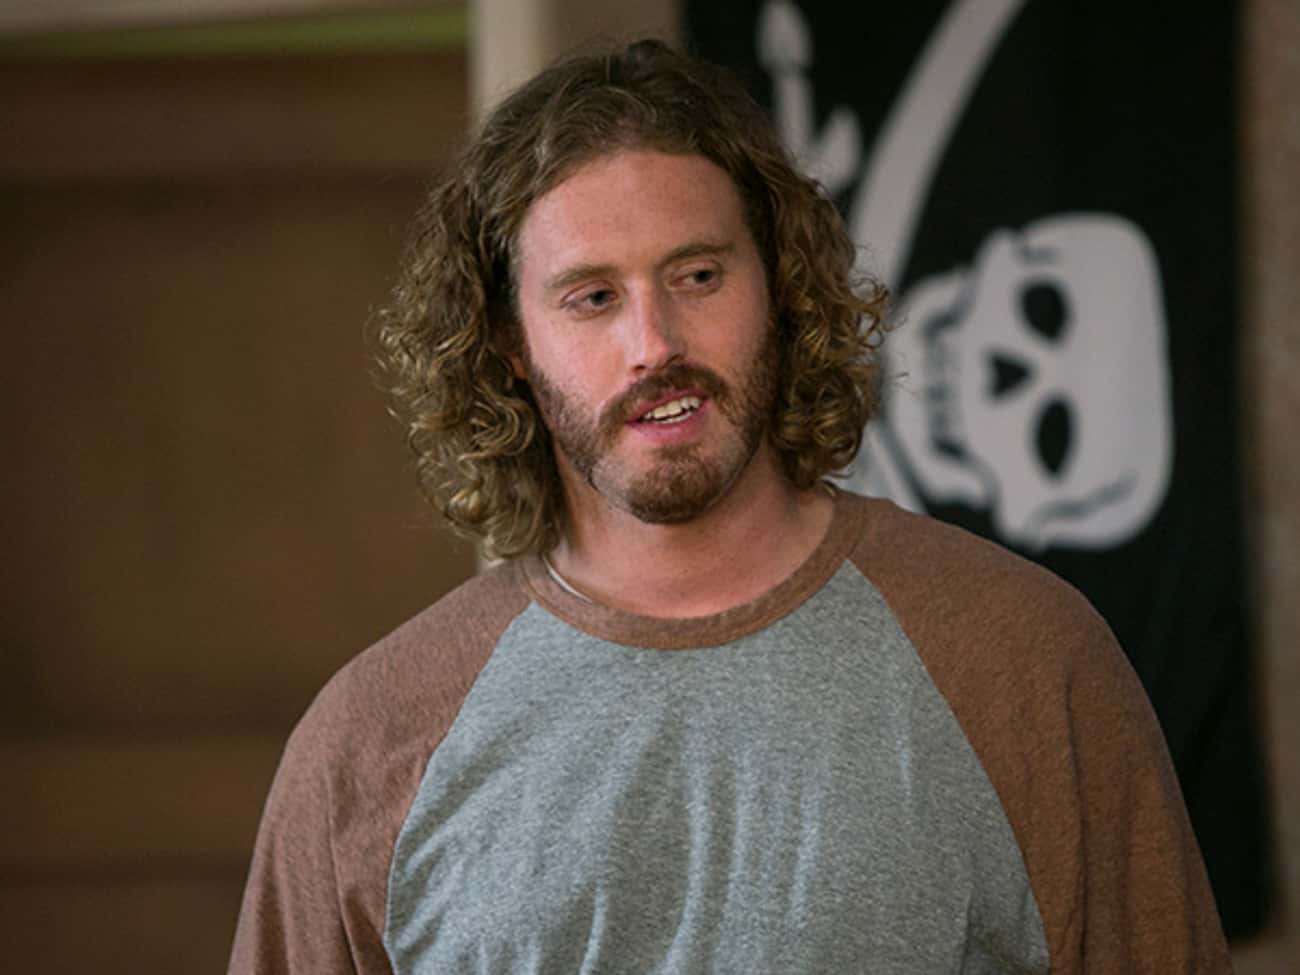 Erlich Bachman From 'Silicon Valley'